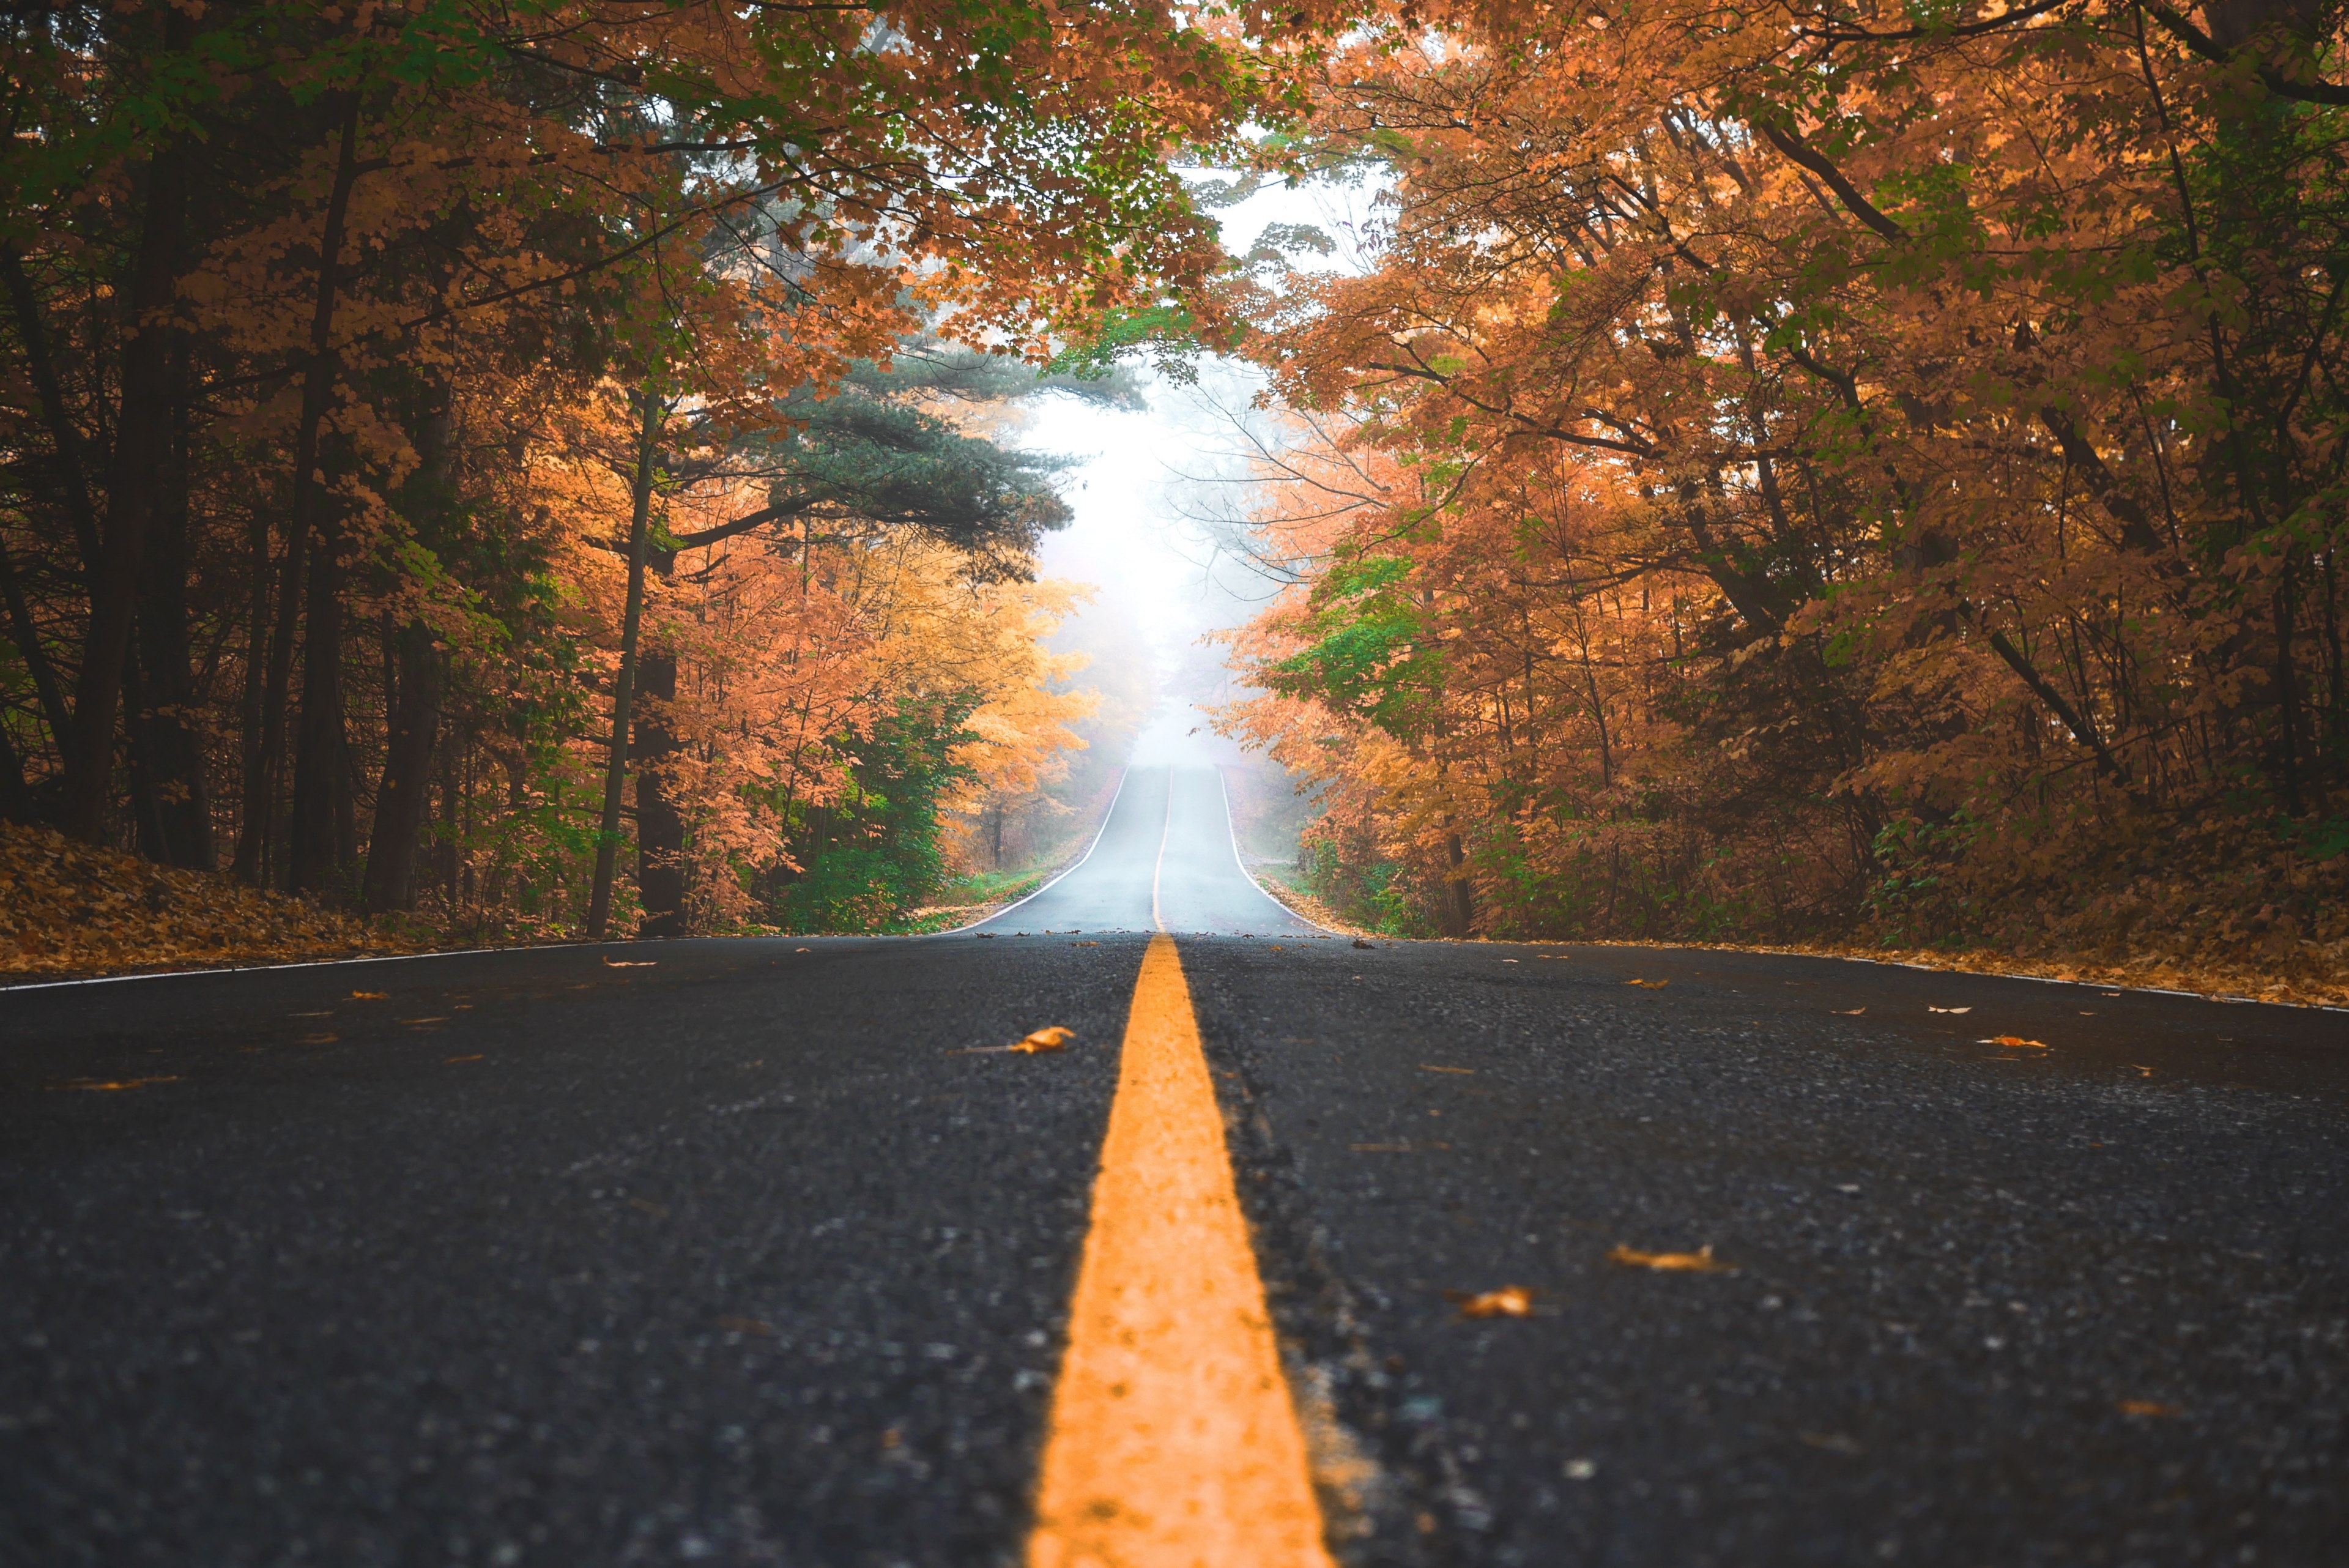 Wallpaper / a fall road lined with trees with red and orange leaves in king city, autumn road 4k wallpaper